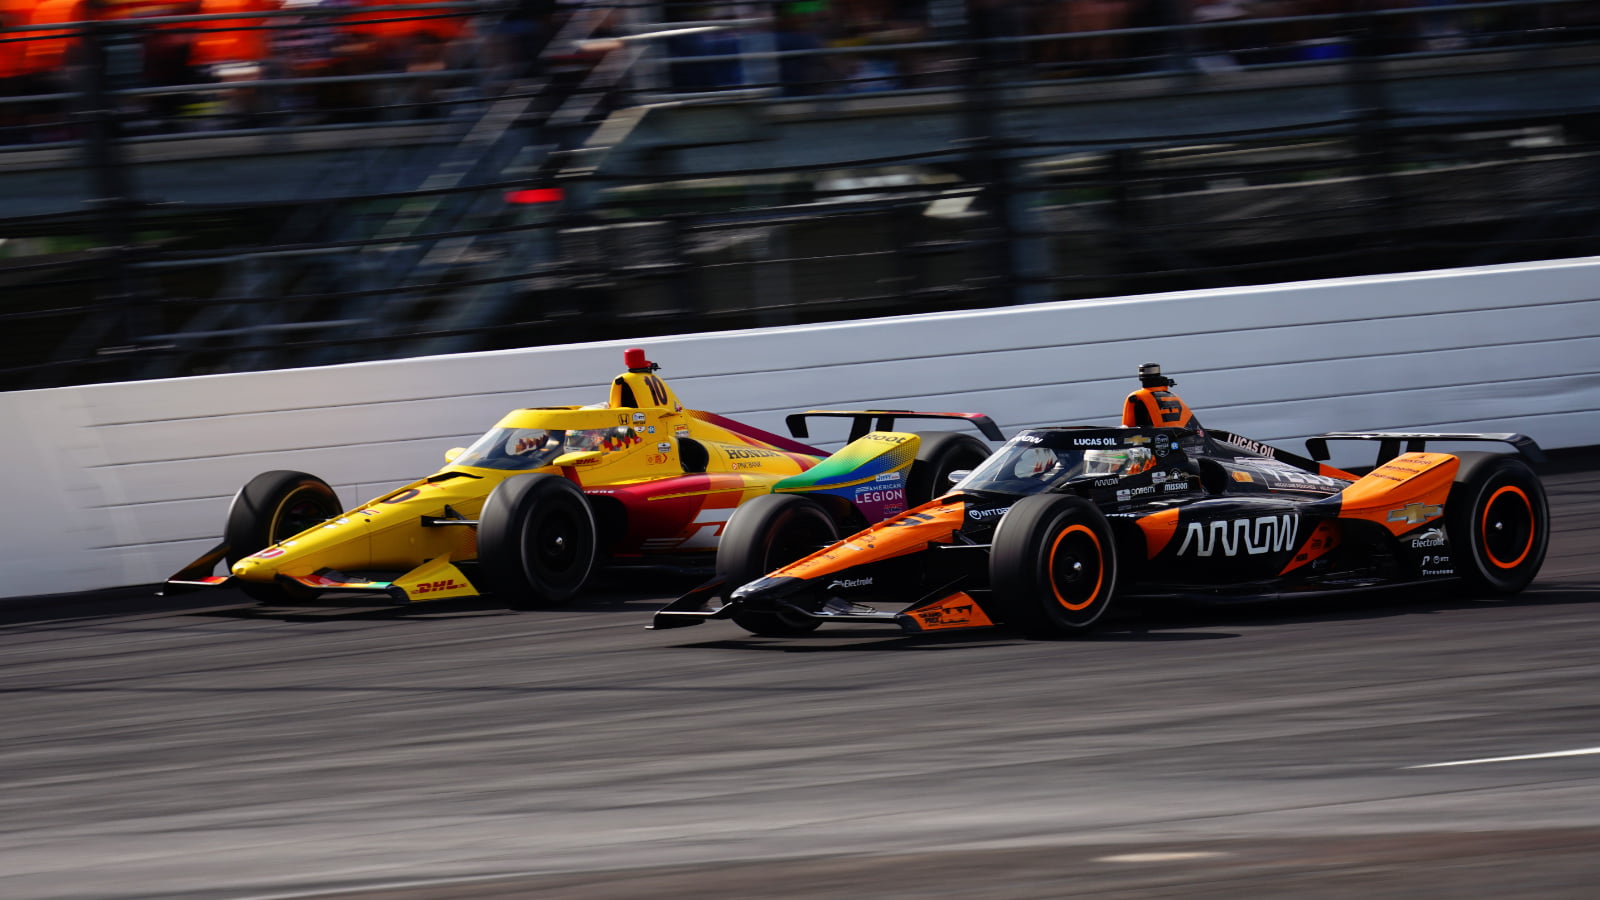 Emotional O’Ward reflects on 'heartbreaking' Indy 500 defeat